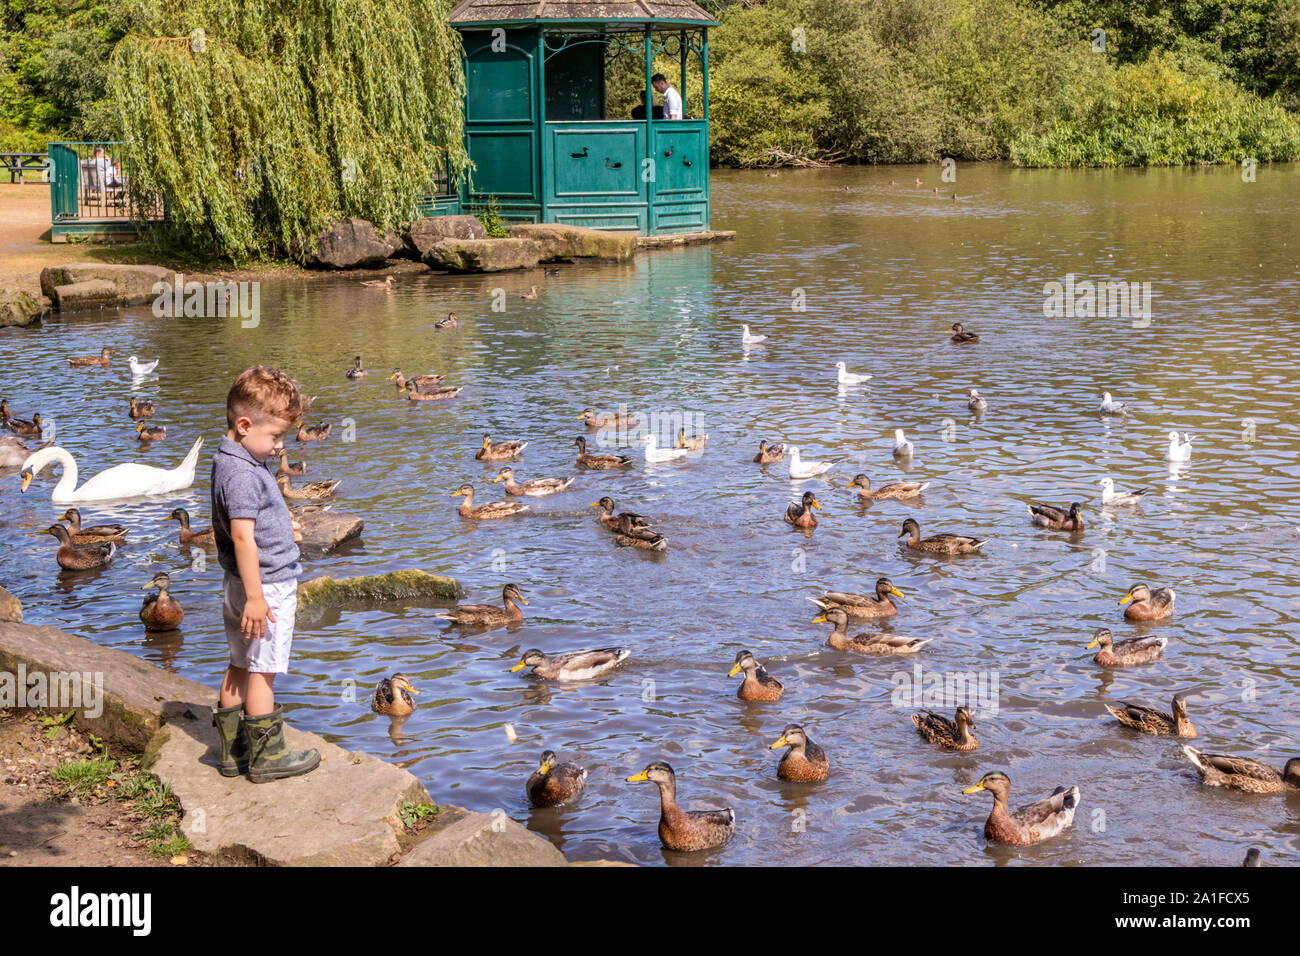 A small boy feeding the ducks on the lake at Golden Acre Park, Leeds, West Yorkshire UK Stock Photo